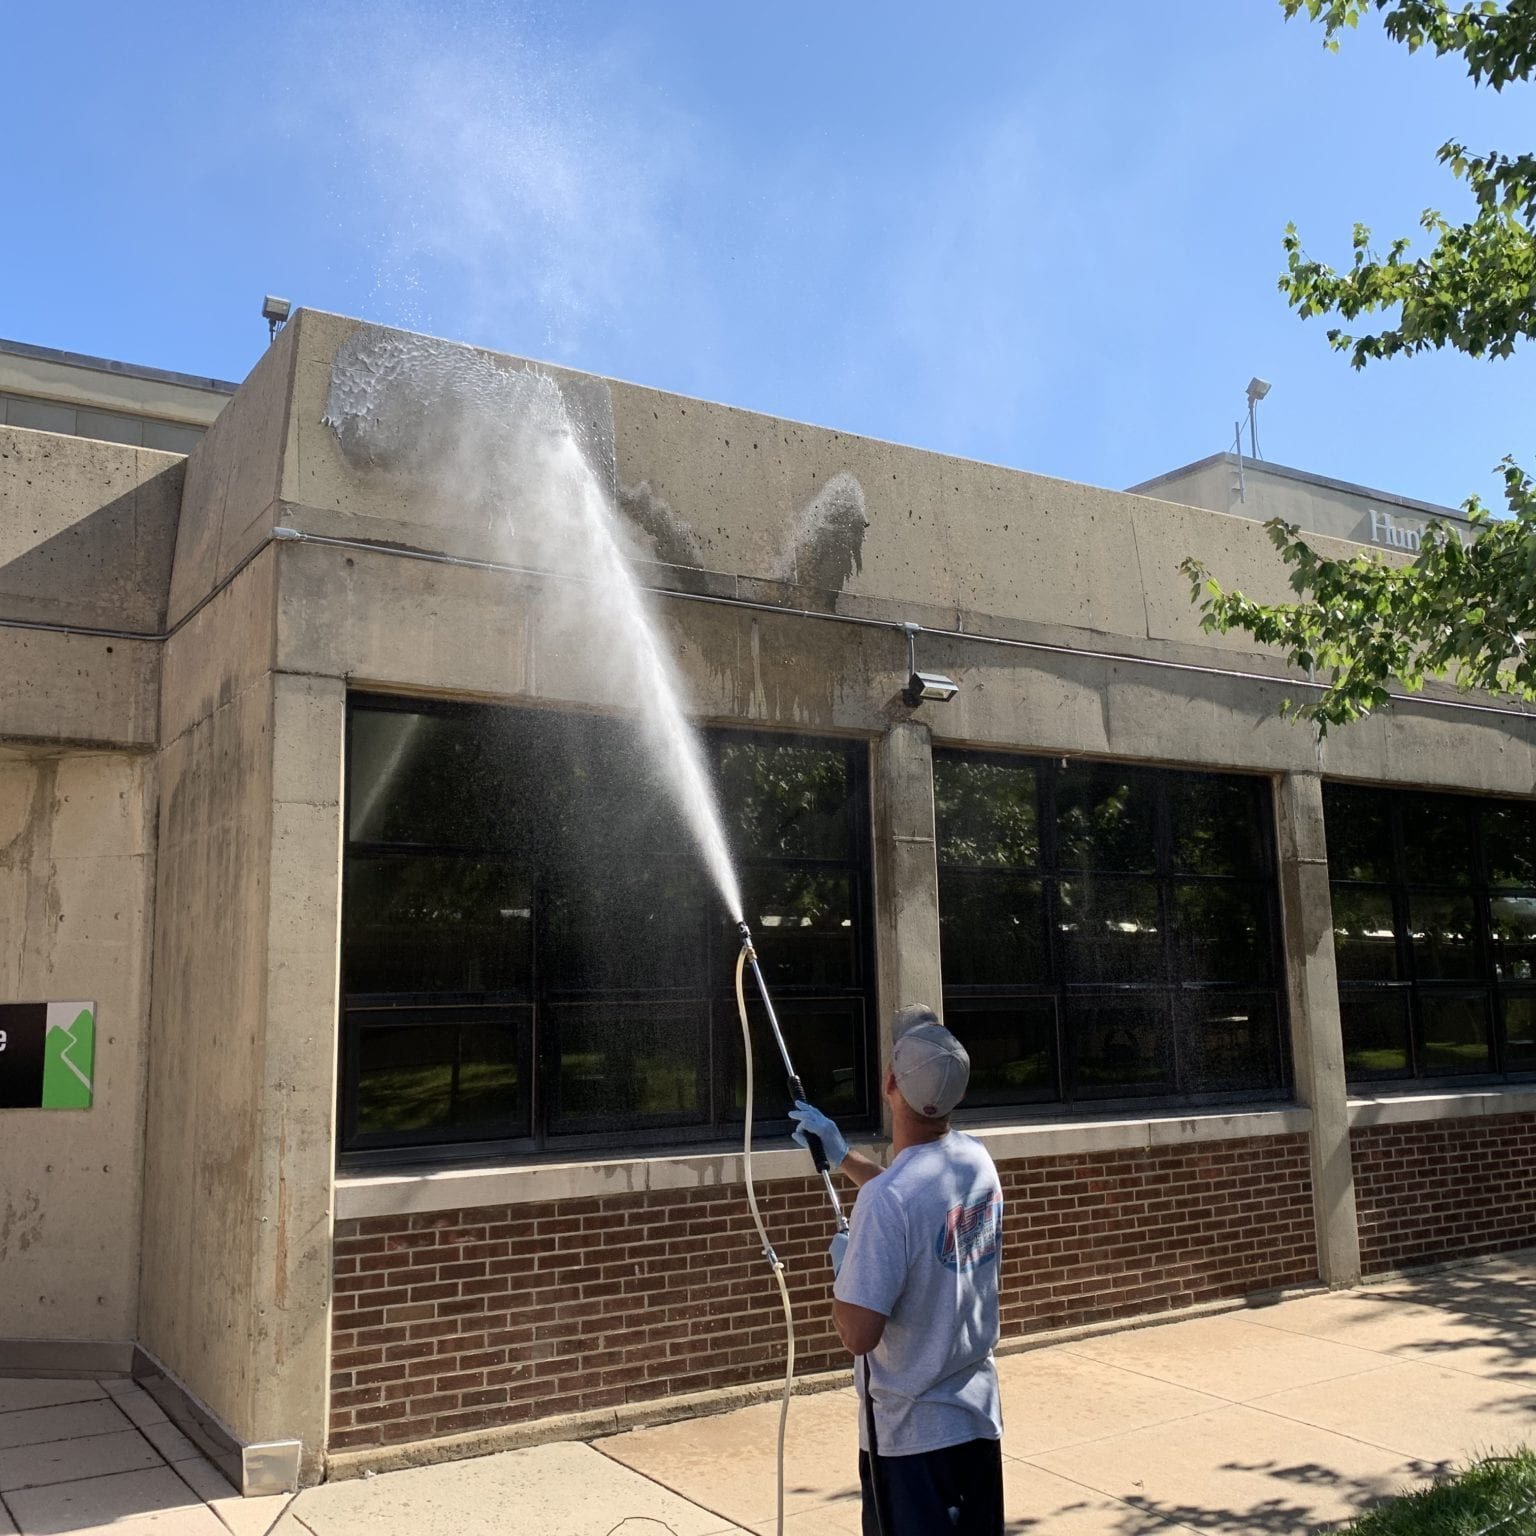 Commercial Building Cleaning services from PSI Pressure Washing. Call Today.